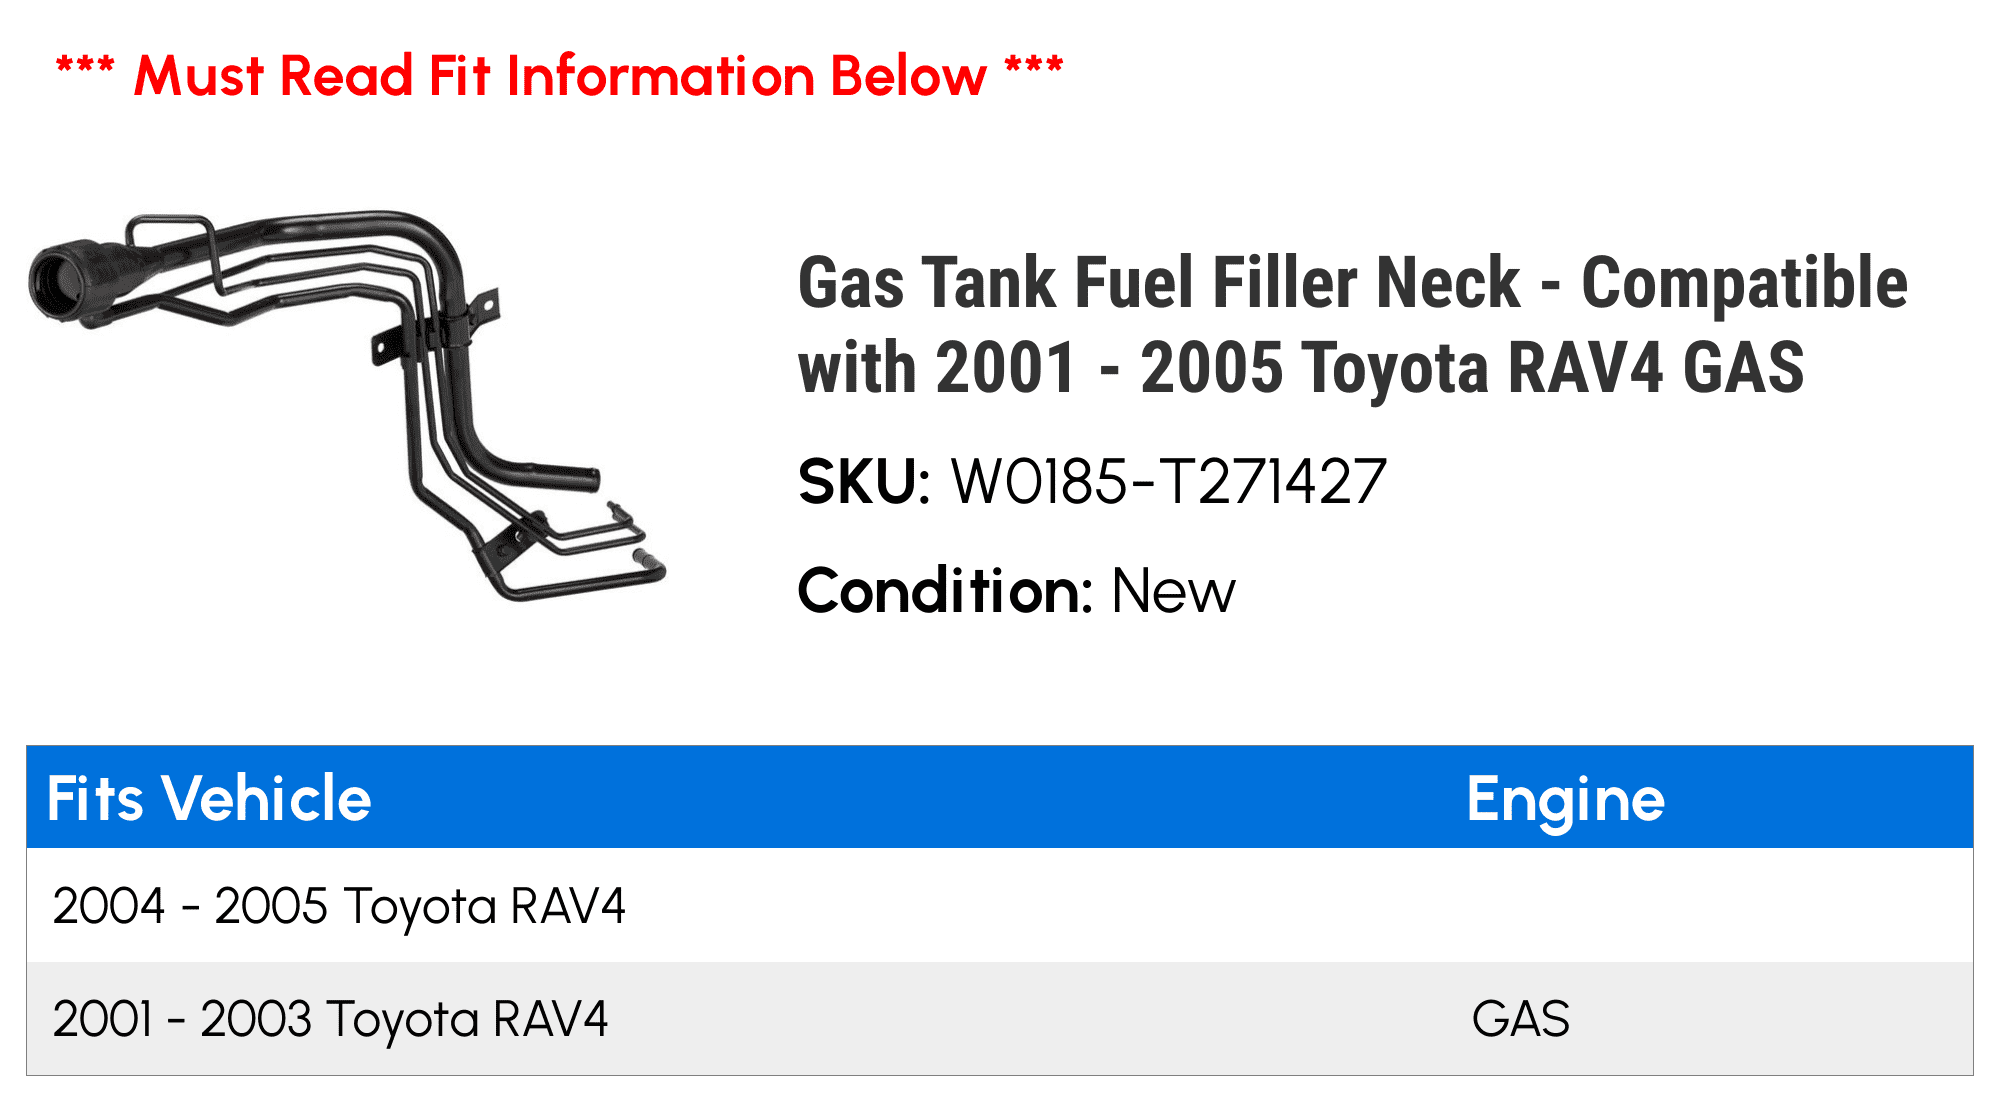 Garage-Pro Fuel Tank Filler Neck Compatible with 2001-2005 Toyota RAV4 Threaded Type 